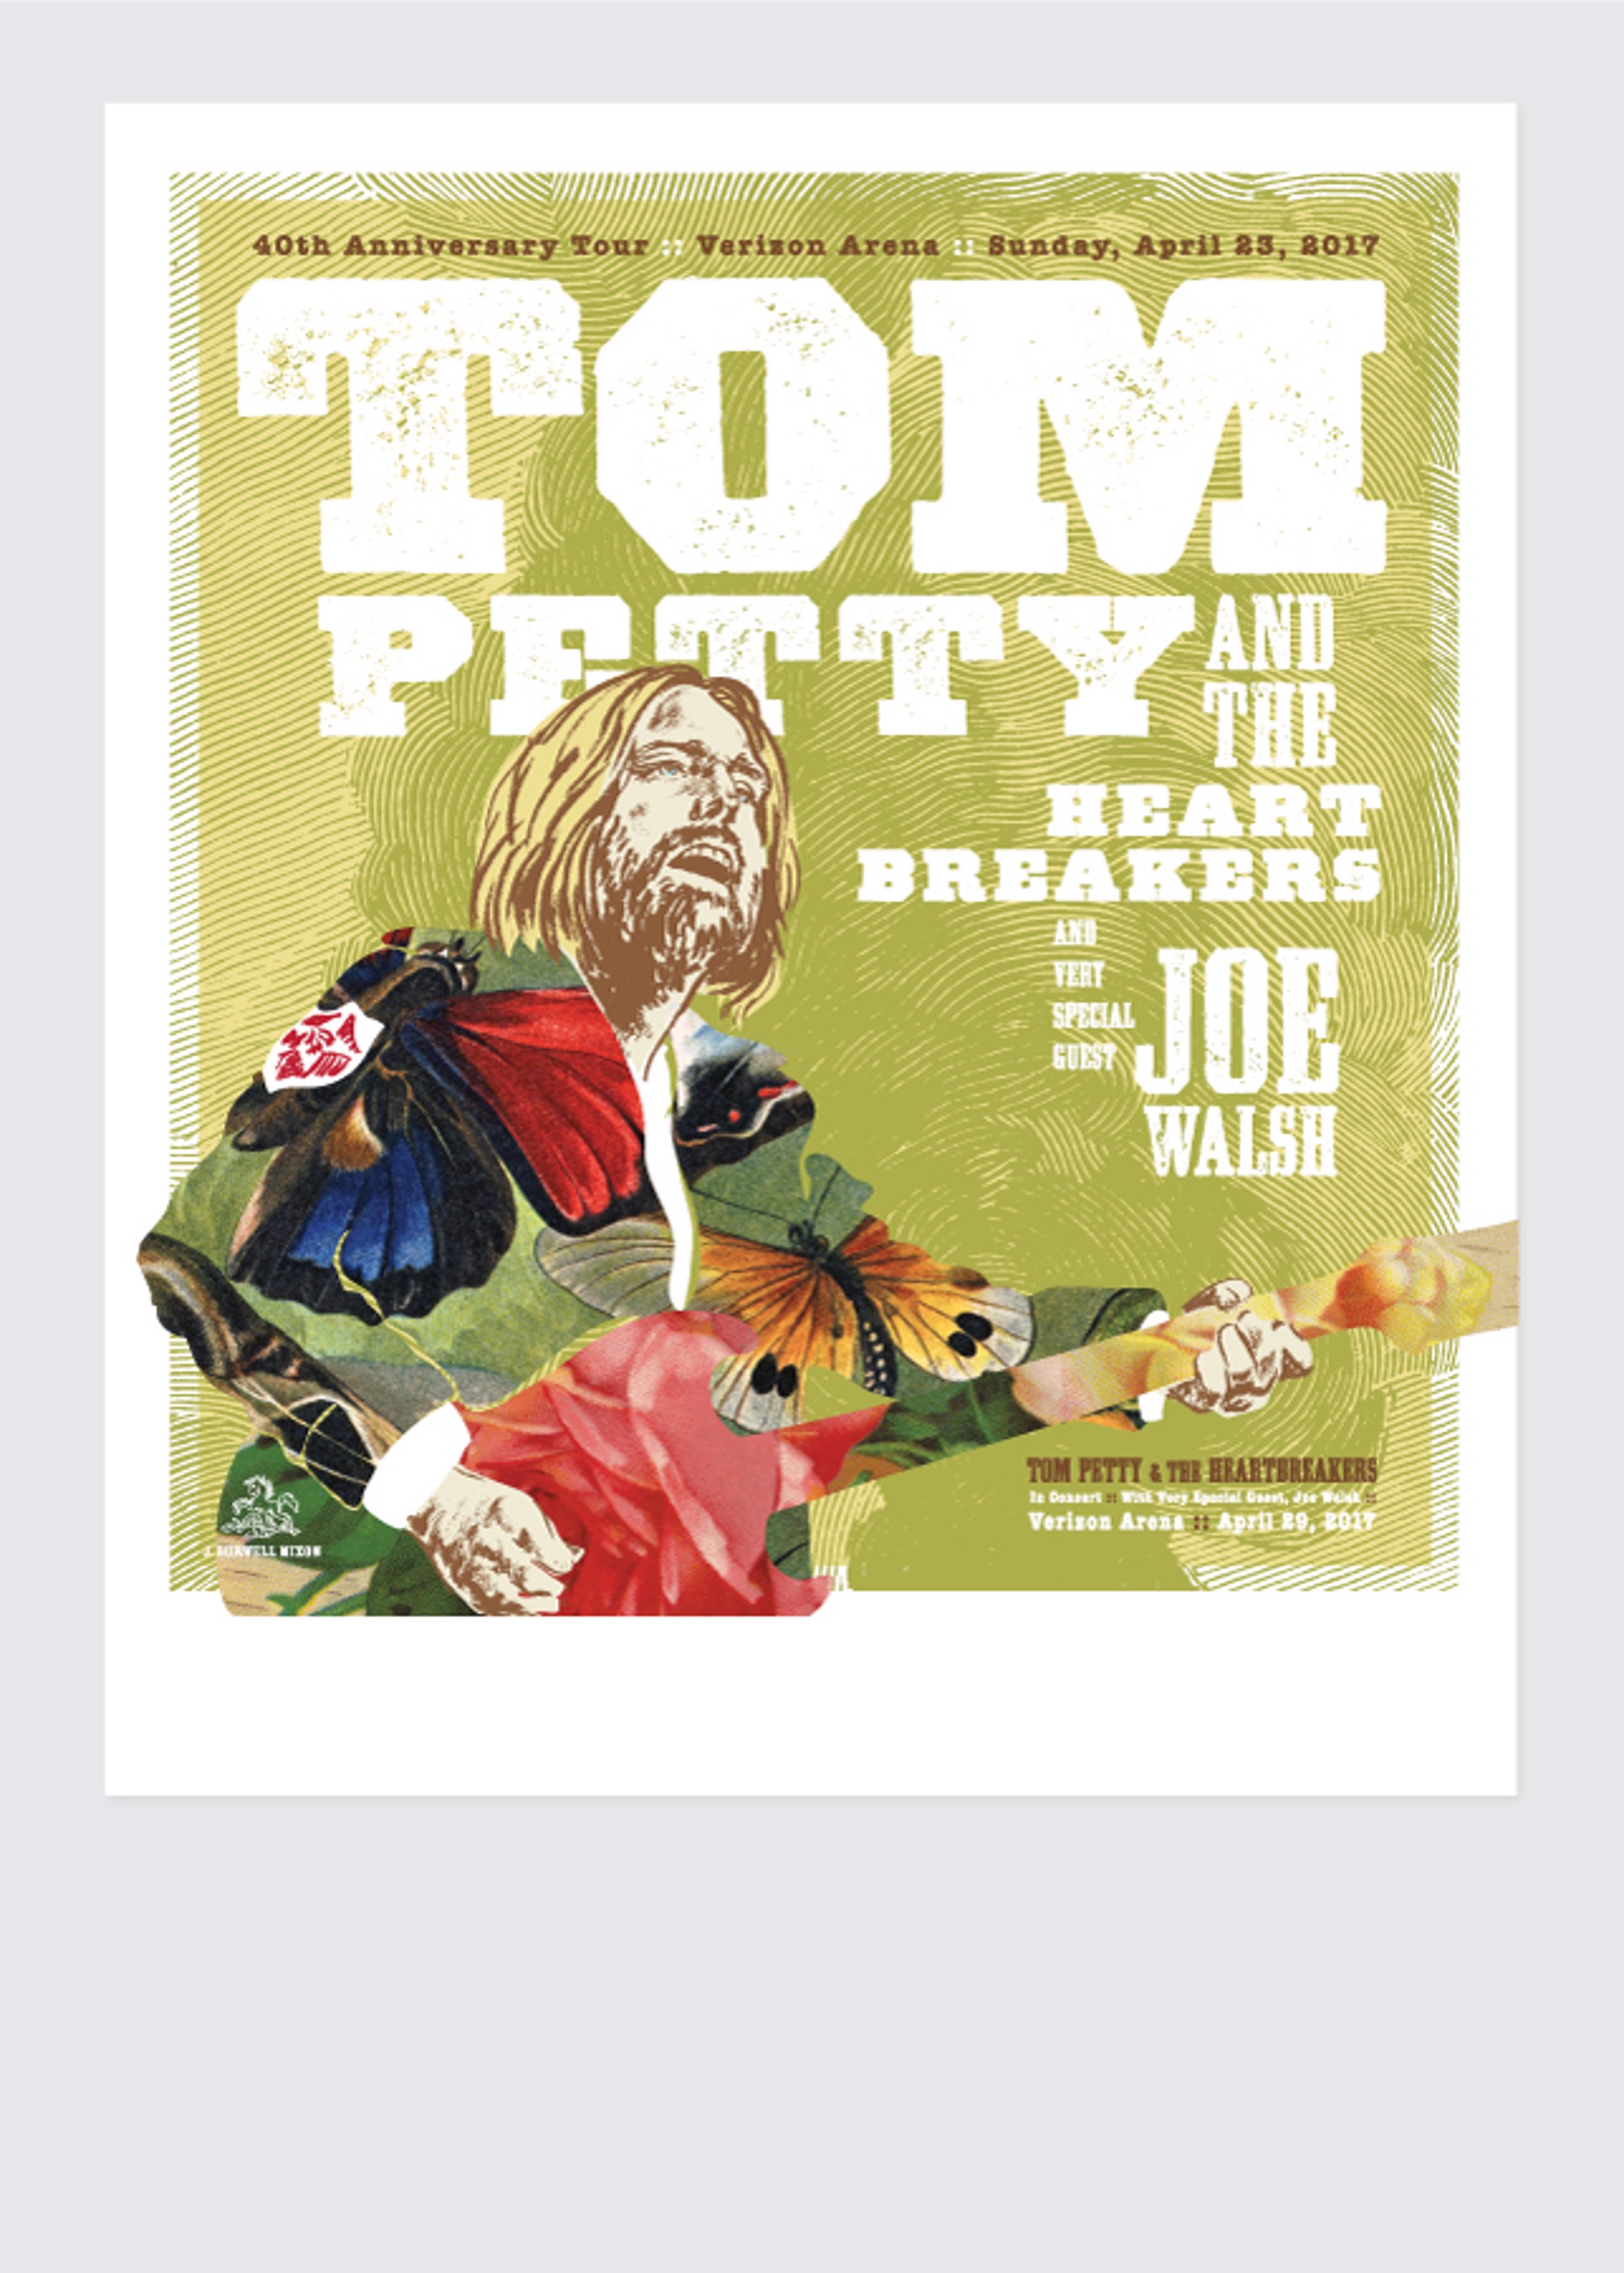 Tom Petty Concert Poster 2017 by Jamie Burwell Mixon